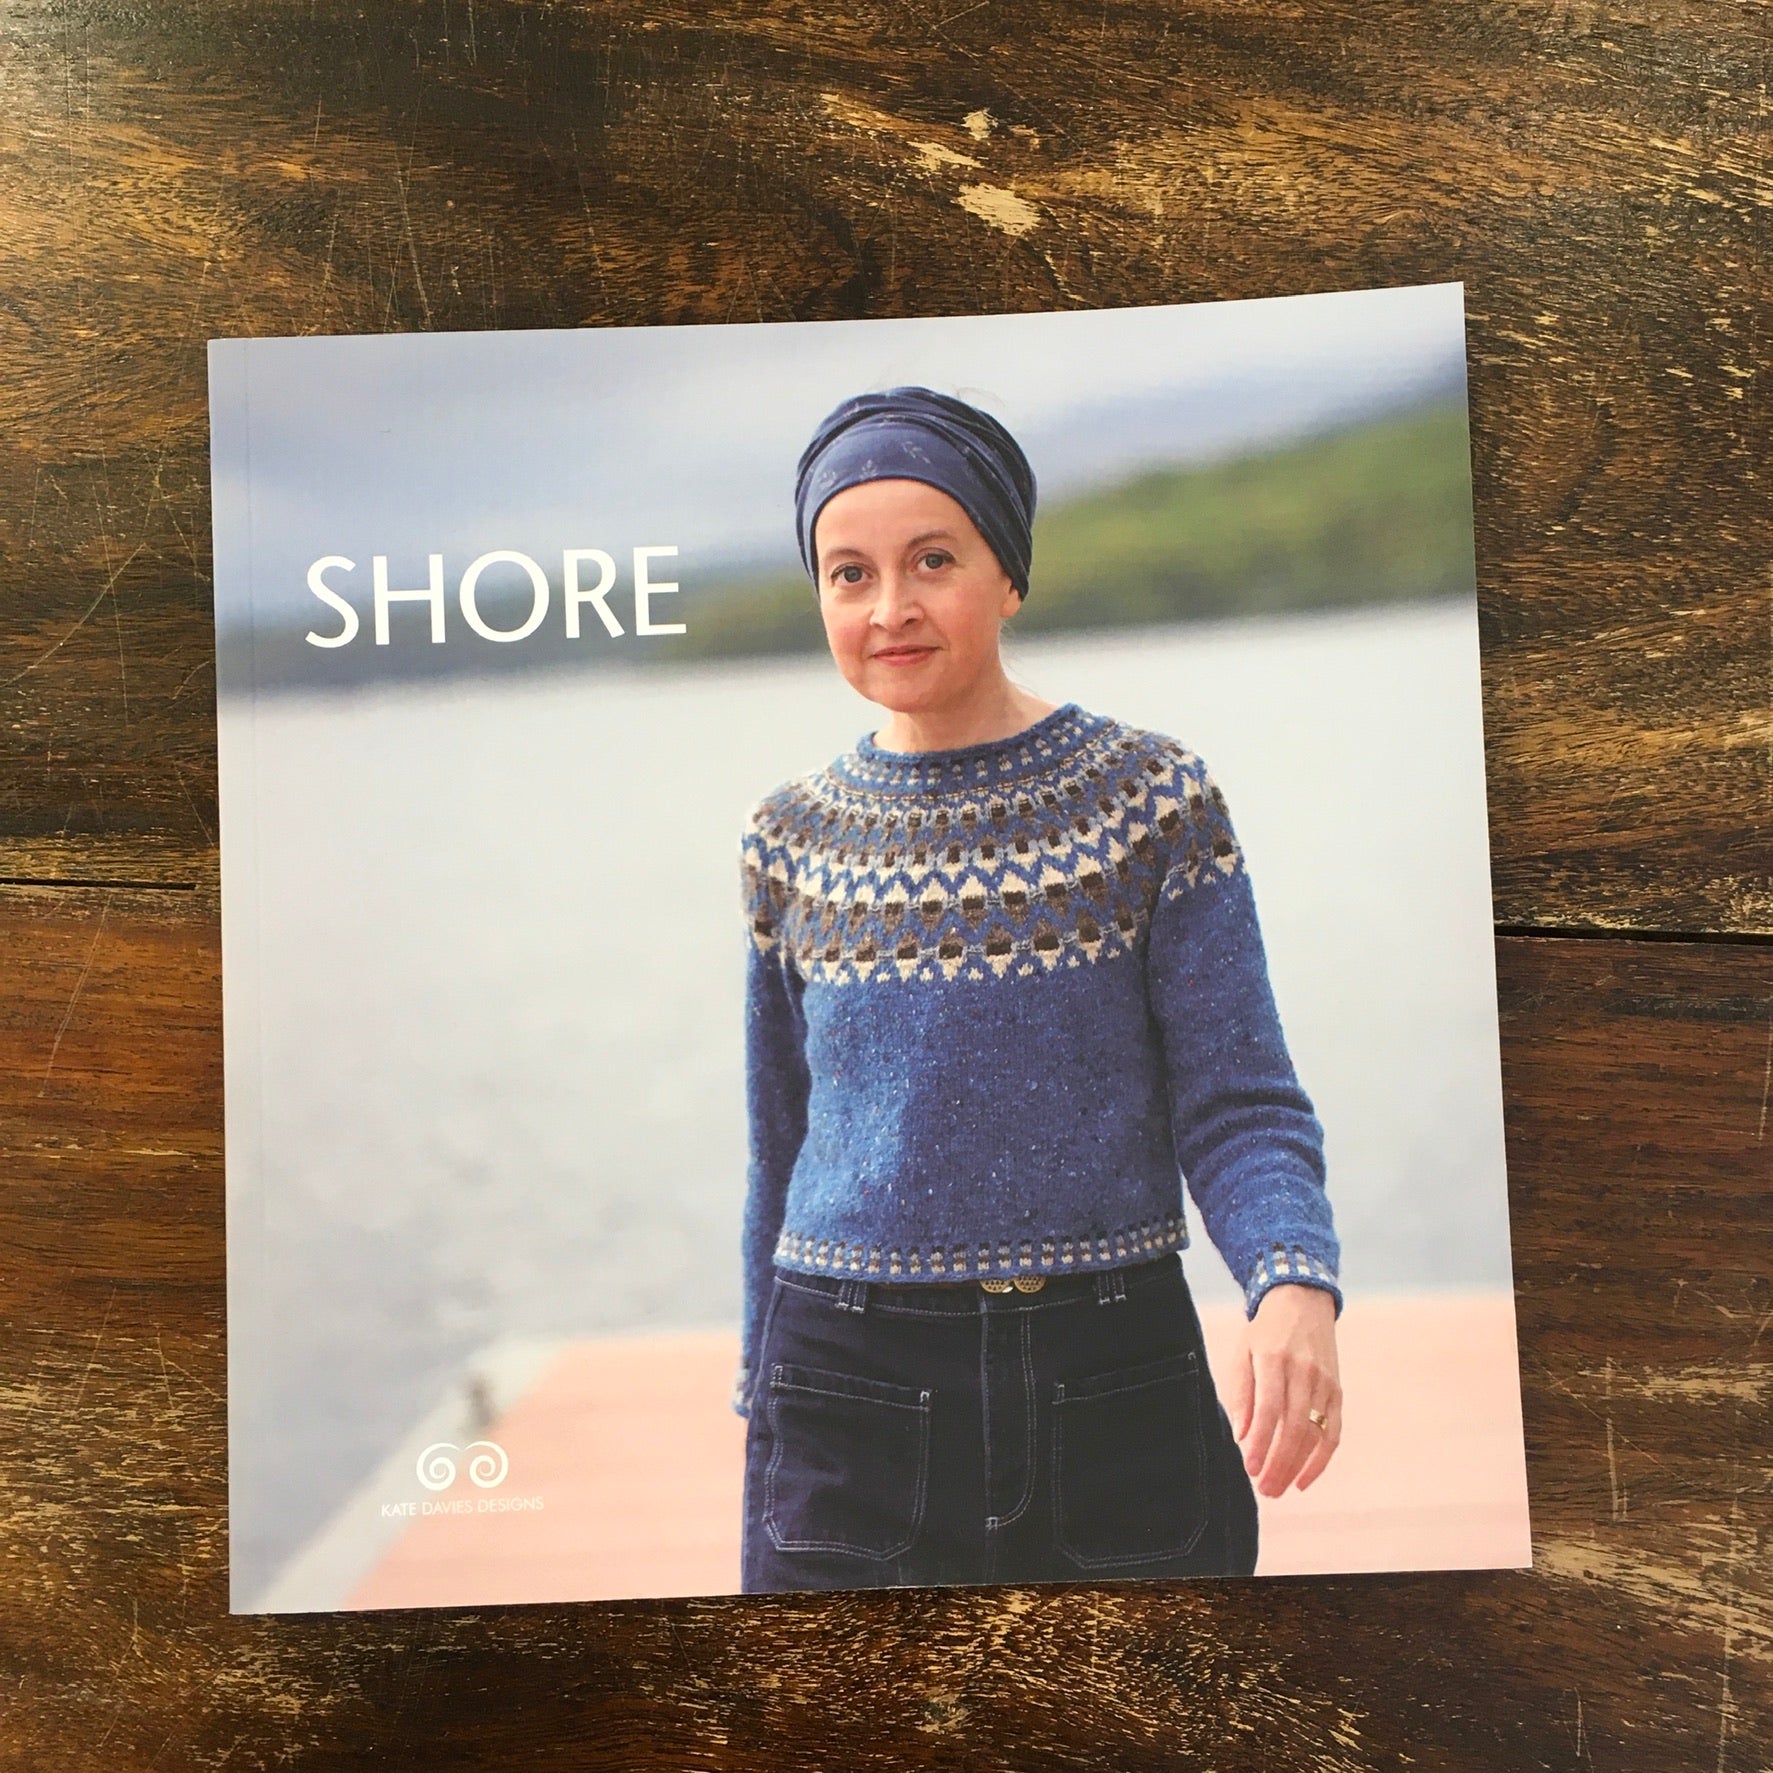 Shore Kate The Woolly Brew